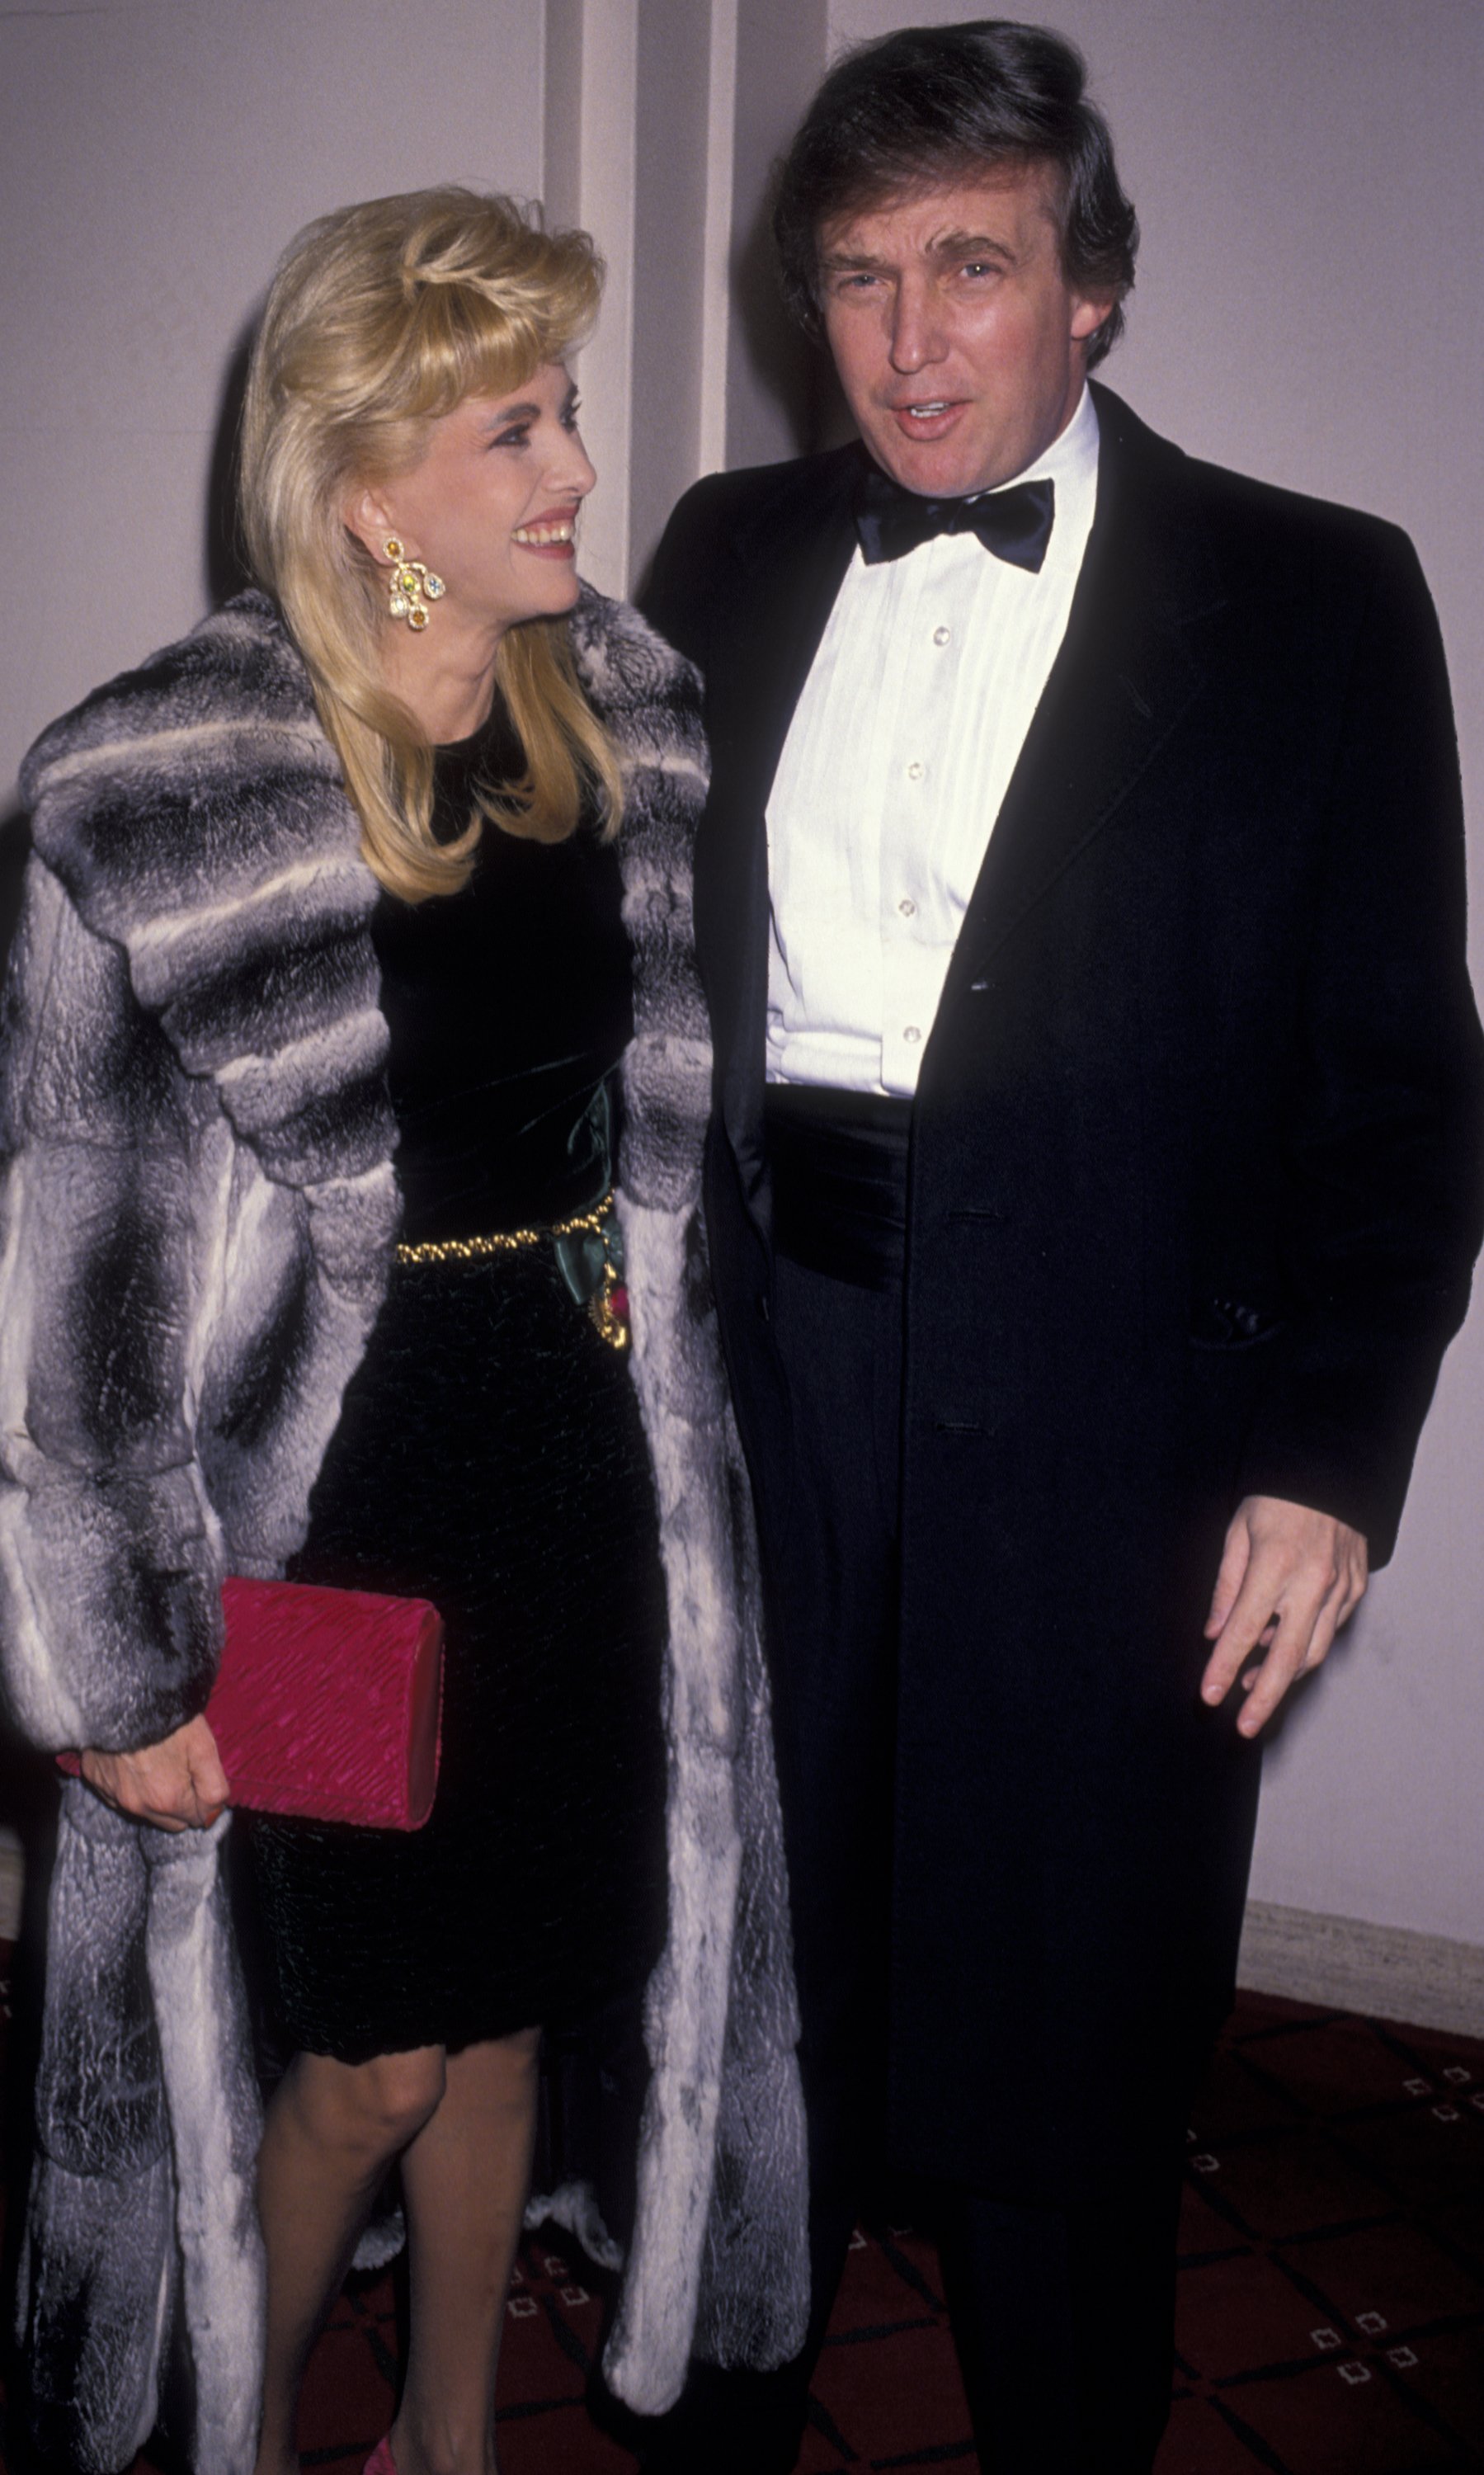 Businessman Donald Trump and model Ivana Trump attending United Jewish Appeal Tribute Gala at the Waldorf Hotel on February 4, 1990 in New York City. | Source: Getty Images